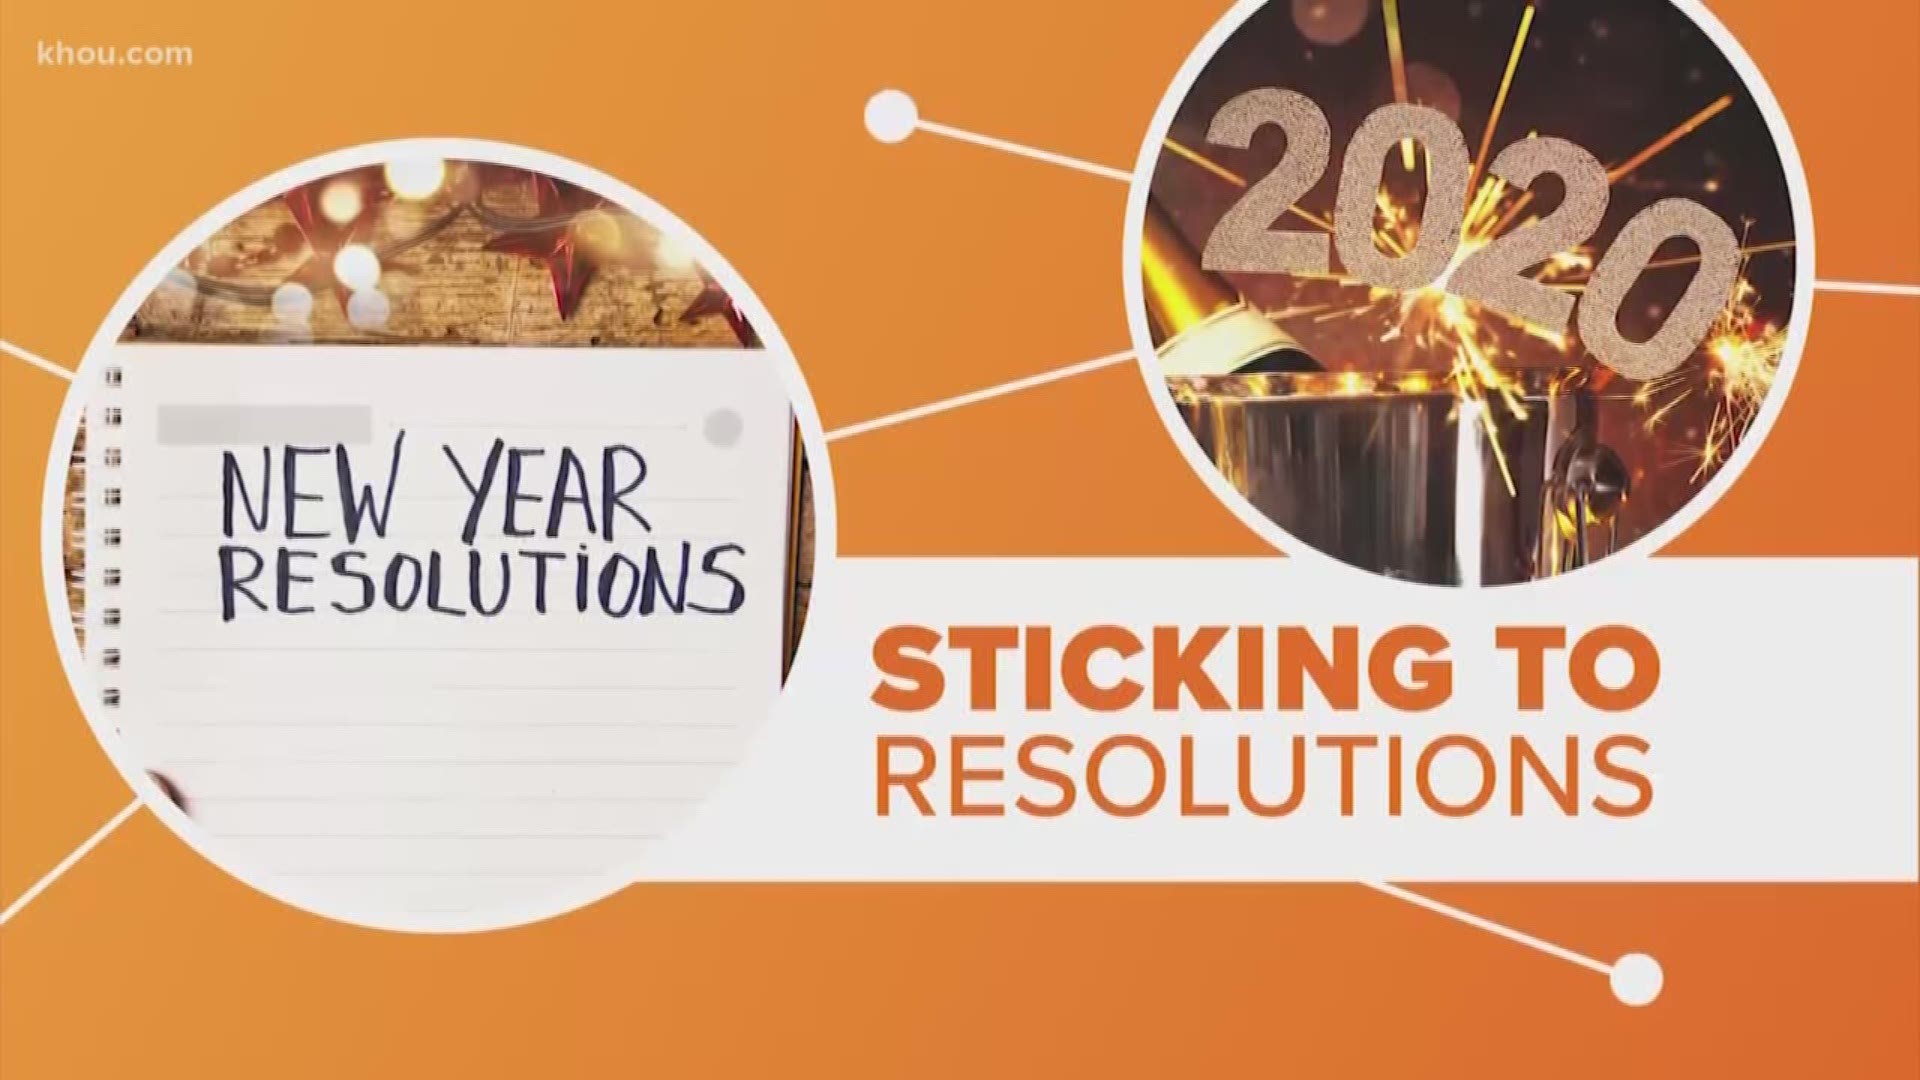 Have you made your New Year’s resolutions yet? The biggest challenge is always sticking with them past that first month. So what can you do to stay committed?